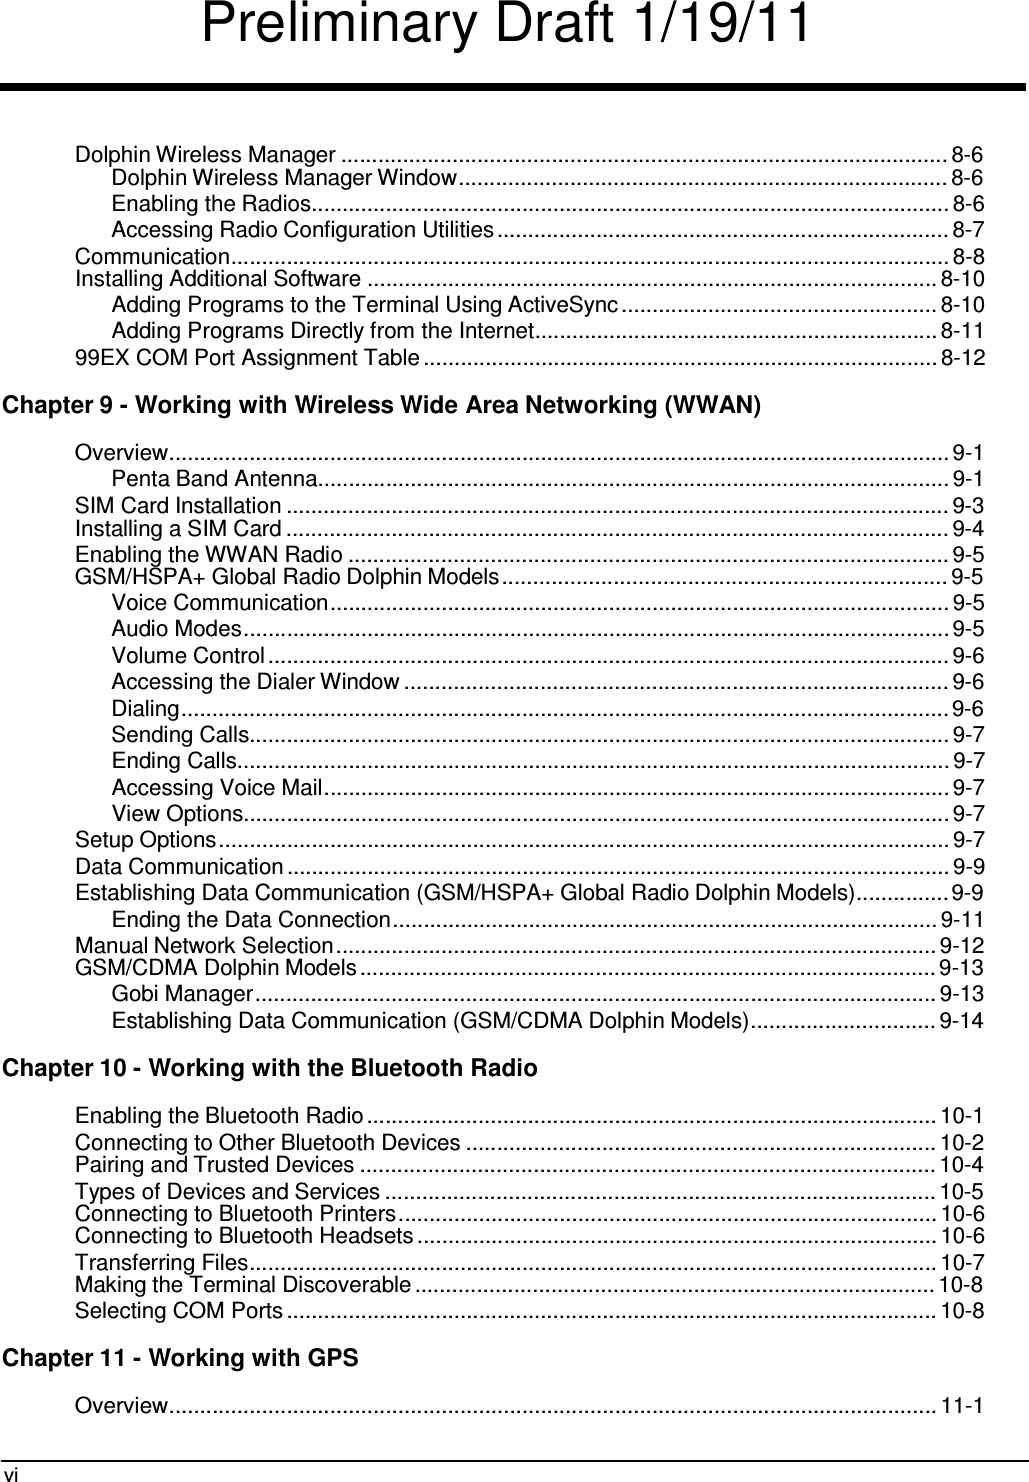 Preliminary Draft 1/19/11 vi     Dolphin Wireless Manager .................................................................................................. 8-6 Dolphin Wireless Manager Window............................................................................... 8-6 Enabling the Radios....................................................................................................... 8-6 Accessing Radio Configuration Utilities ......................................................................... 8-7 Communication.................................................................................................................... 8-8 Installing Additional Software ............................................................................................ 8-10 Adding Programs to the Terminal Using ActiveSync ................................................... 8-10 Adding Programs Directly from the Internet................................................................. 8-11 99EX COM Port Assignment Table ................................................................................... 8-12  Chapter 9 - Working with Wireless Wide Area Networking (WWAN)  Overview.............................................................................................................................. 9-1 Penta Band Antenna...................................................................................................... 9-1 SIM Card Installation ........................................................................................................... 9-3 Installing a SIM Card ........................................................................................................... 9-4 Enabling the WWAN Radio ................................................................................................. 9-5 GSM/HSPA+ Global Radio Dolphin Models ........................................................................ 9-5 Voice Communication.................................................................................................... 9-5 Audio Modes.................................................................................................................. 9-5 Volume Control .............................................................................................................. 9-6 Accessing the Dialer Window ........................................................................................ 9-6 Dialing............................................................................................................................ 9-6 Sending Calls................................................................................................................. 9-7 Ending Calls................................................................................................................... 9-7 Accessing Voice Mail..................................................................................................... 9-7 View Options.................................................................................................................. 9-7 Setup Options ...................................................................................................................... 9-7 Data Communication ........................................................................................................... 9-9 Establishing Data Communication (GSM/HSPA+ Global Radio Dolphin Models)............... 9-9 Ending the Data Connection........................................................................................ 9-11 Manual Network Selection ................................................................................................. 9-12 GSM/CDMA Dolphin Models ............................................................................................. 9-13 Gobi Manager .............................................................................................................. 9-13 Establishing Data Communication (GSM/CDMA Dolphin Models) .............................. 9-14  Chapter 10 - Working with the Bluetooth Radio  Enabling the Bluetooth Radio ............................................................................................ 10-1 Connecting to Other Bluetooth Devices ............................................................................ 10-2 Pairing and Trusted Devices ............................................................................................. 10-4 Types of Devices and Services ......................................................................................... 10-5 Connecting to Bluetooth Printers ....................................................................................... 10-6 Connecting to Bluetooth Headsets .................................................................................... 10-6 Transferring Files............................................................................................................... 10-7 Making the Terminal Discoverable .................................................................................... 10-8 Selecting COM Ports ......................................................................................................... 10-8  Chapter 11 - Working with GPS  Overview............................................................................................................................ 11-1 